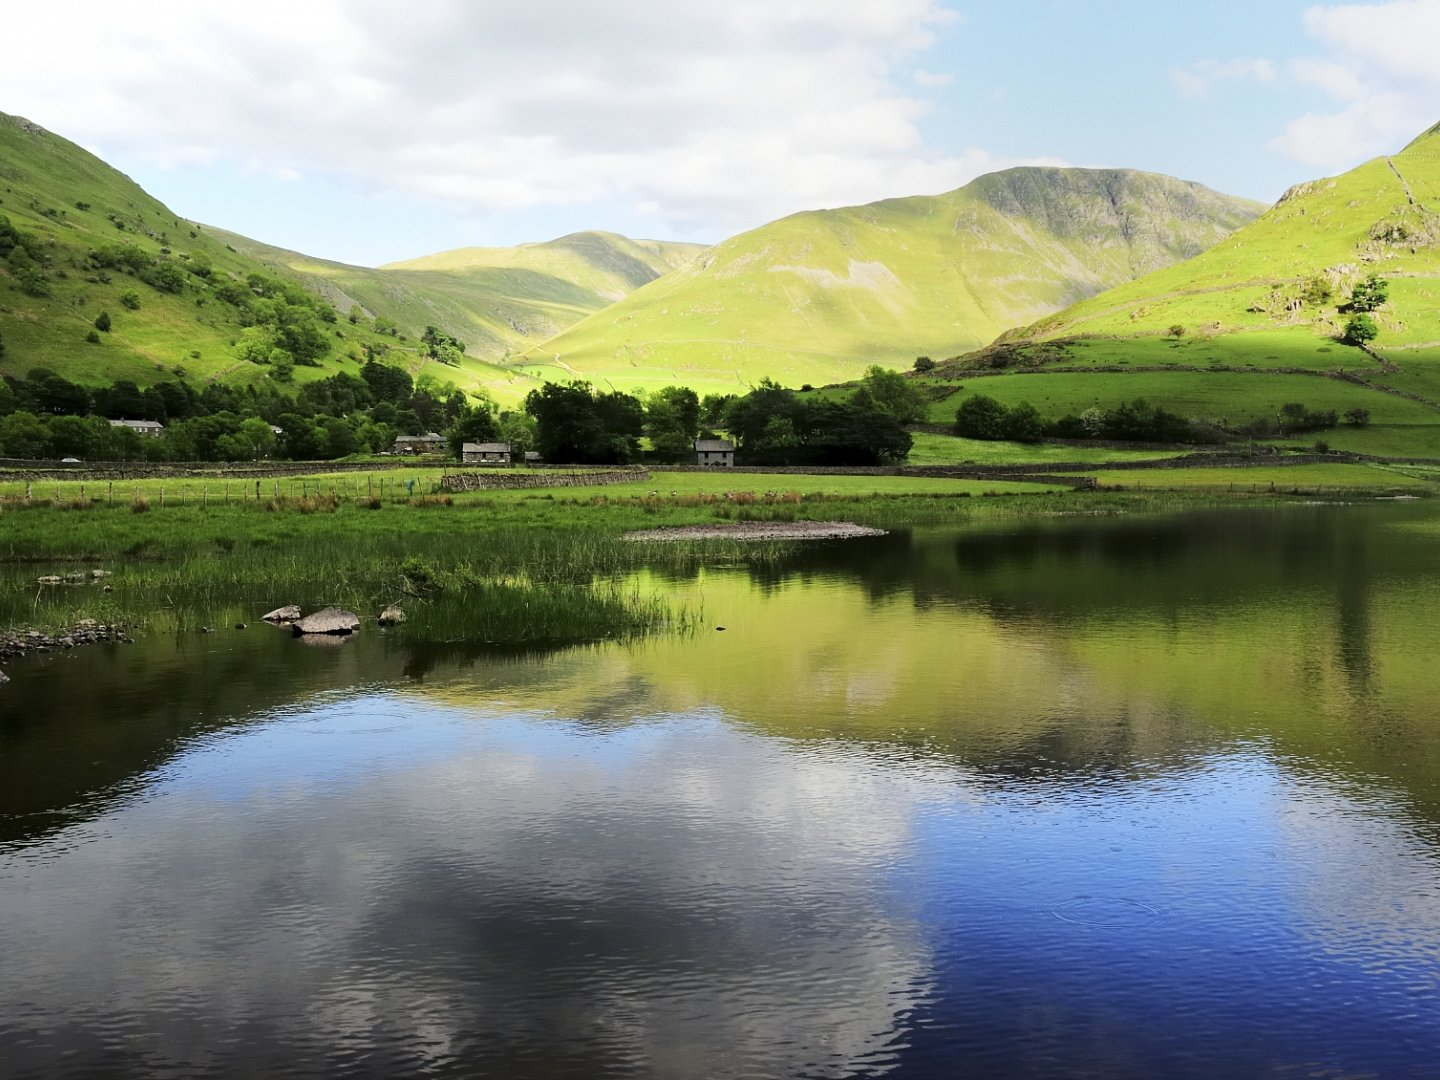 View of Brotherswater close to the camp site